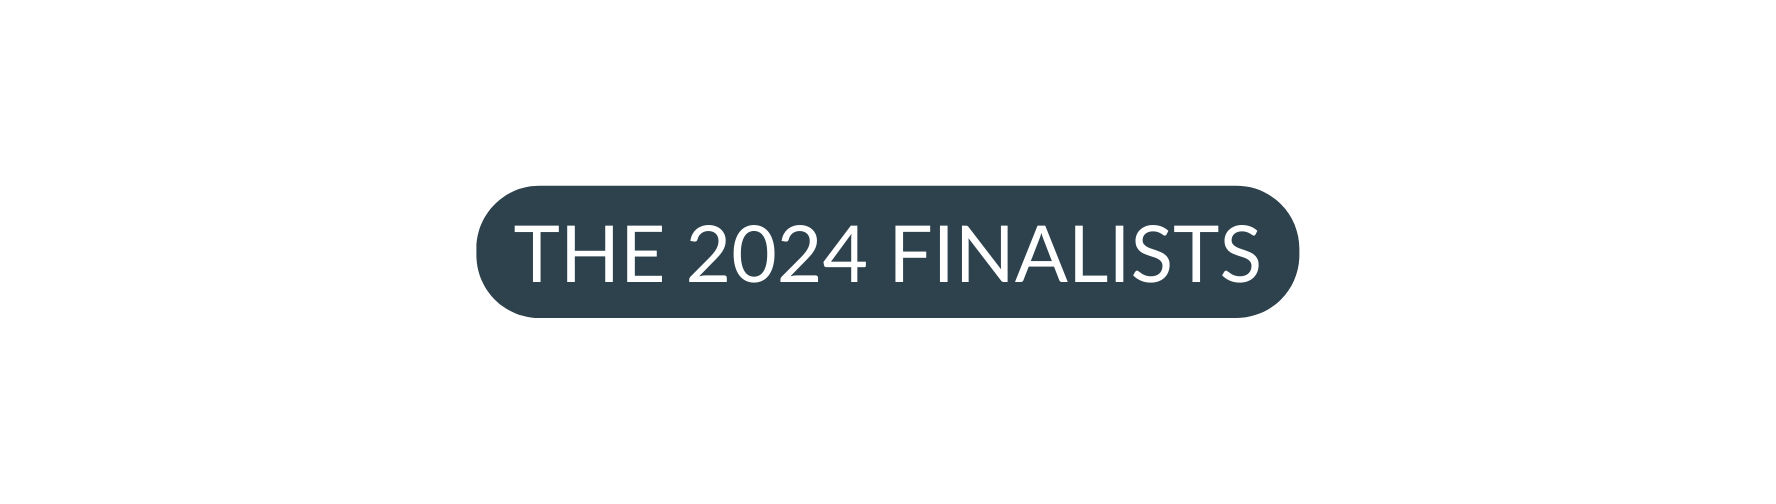 the 2024 FINALISTS